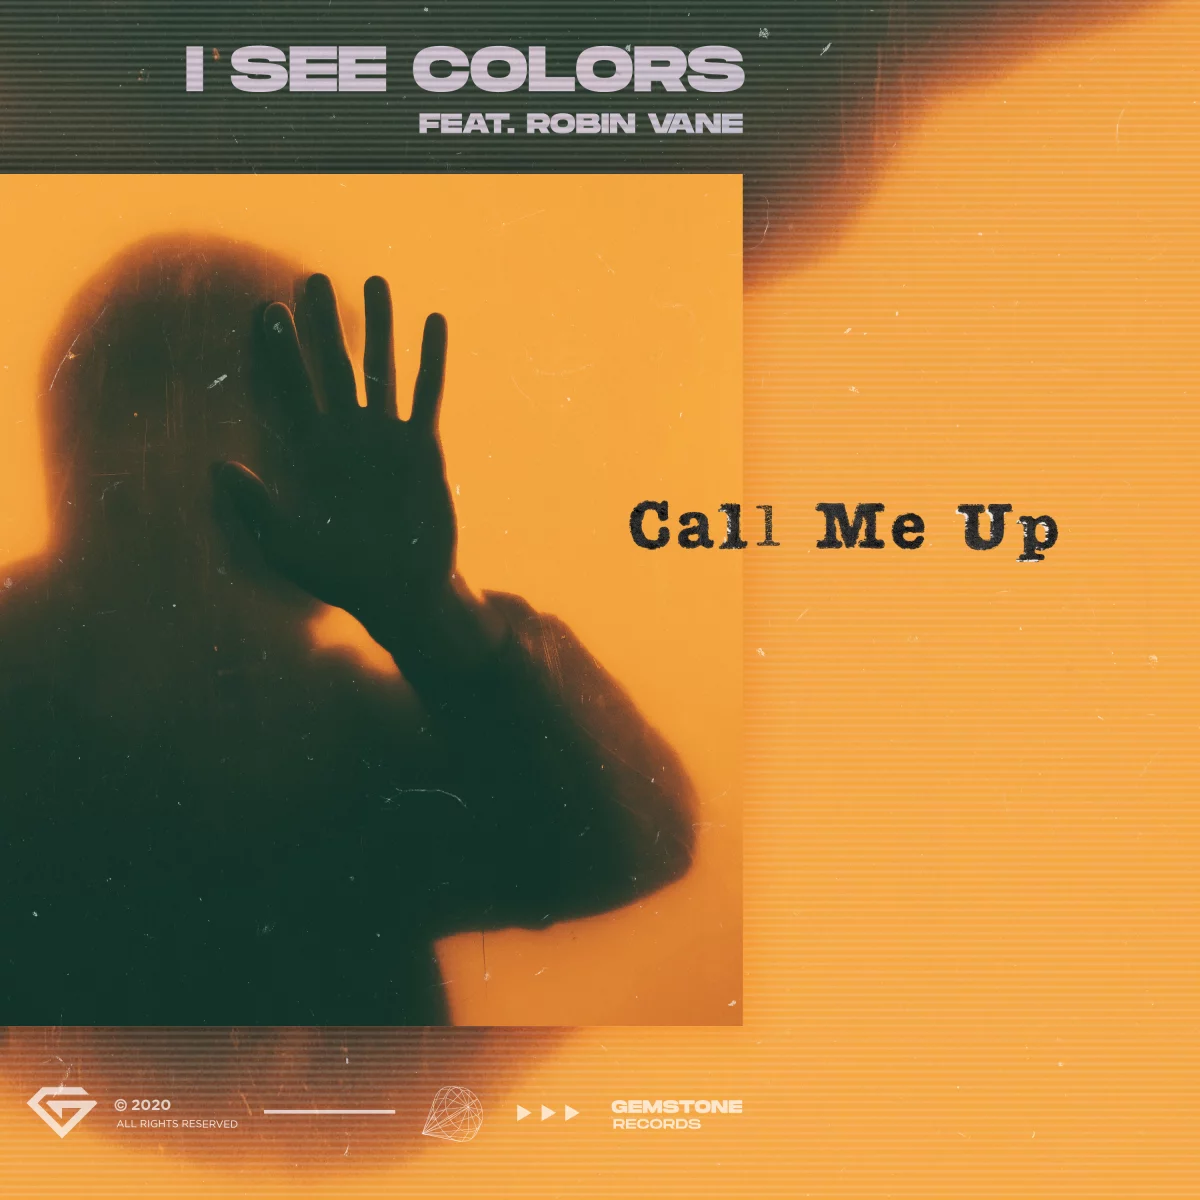 Call Me Up - I See Colors feat. Robin Vane⁠ 